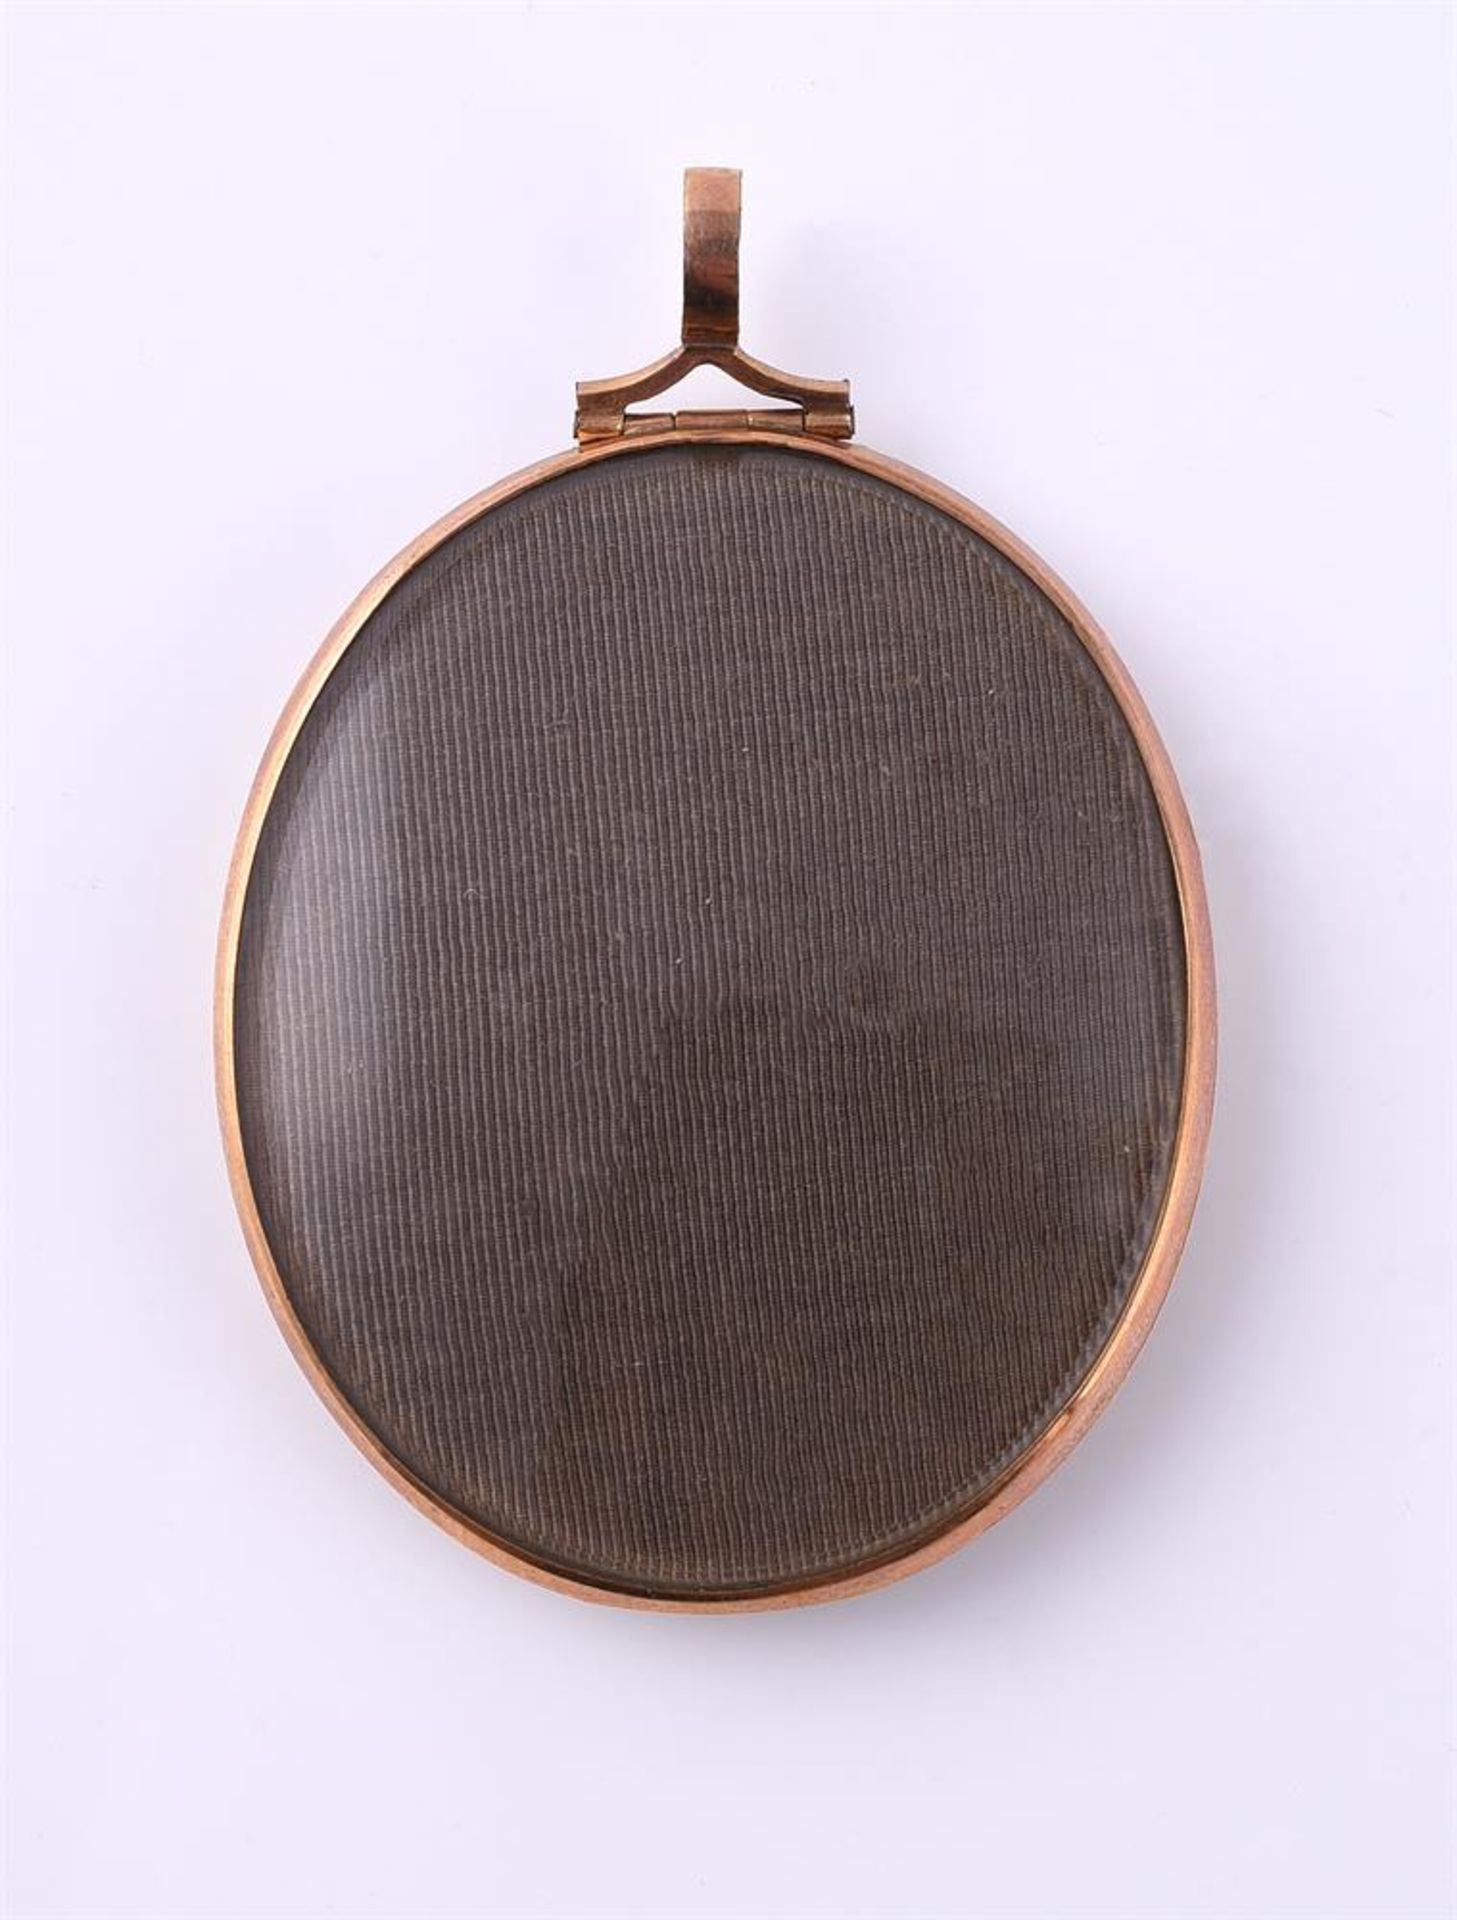 Y JOHN MIERS, A GEORGIAN SILHOUETTE IN A LOCKET MOUNT, CIRCA 1800 - Image 2 of 2